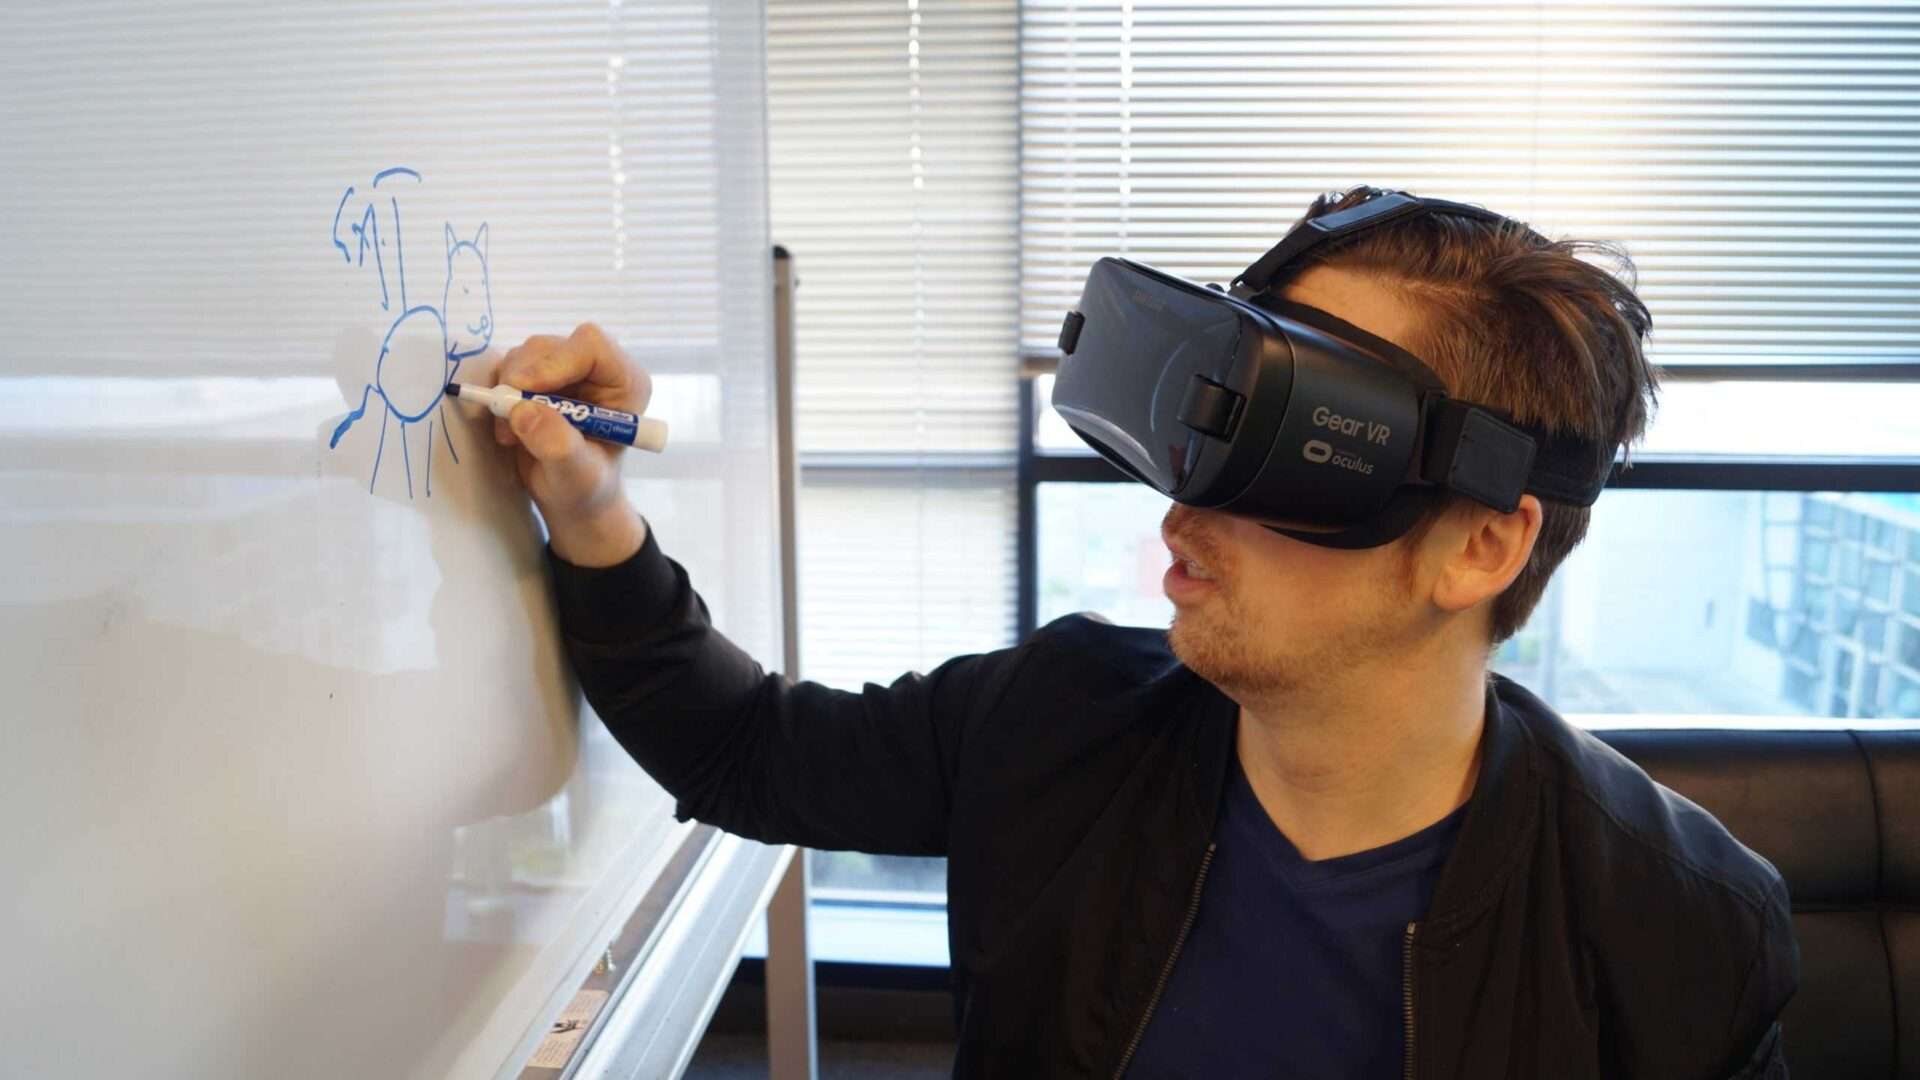 this is what the gear vr looks like